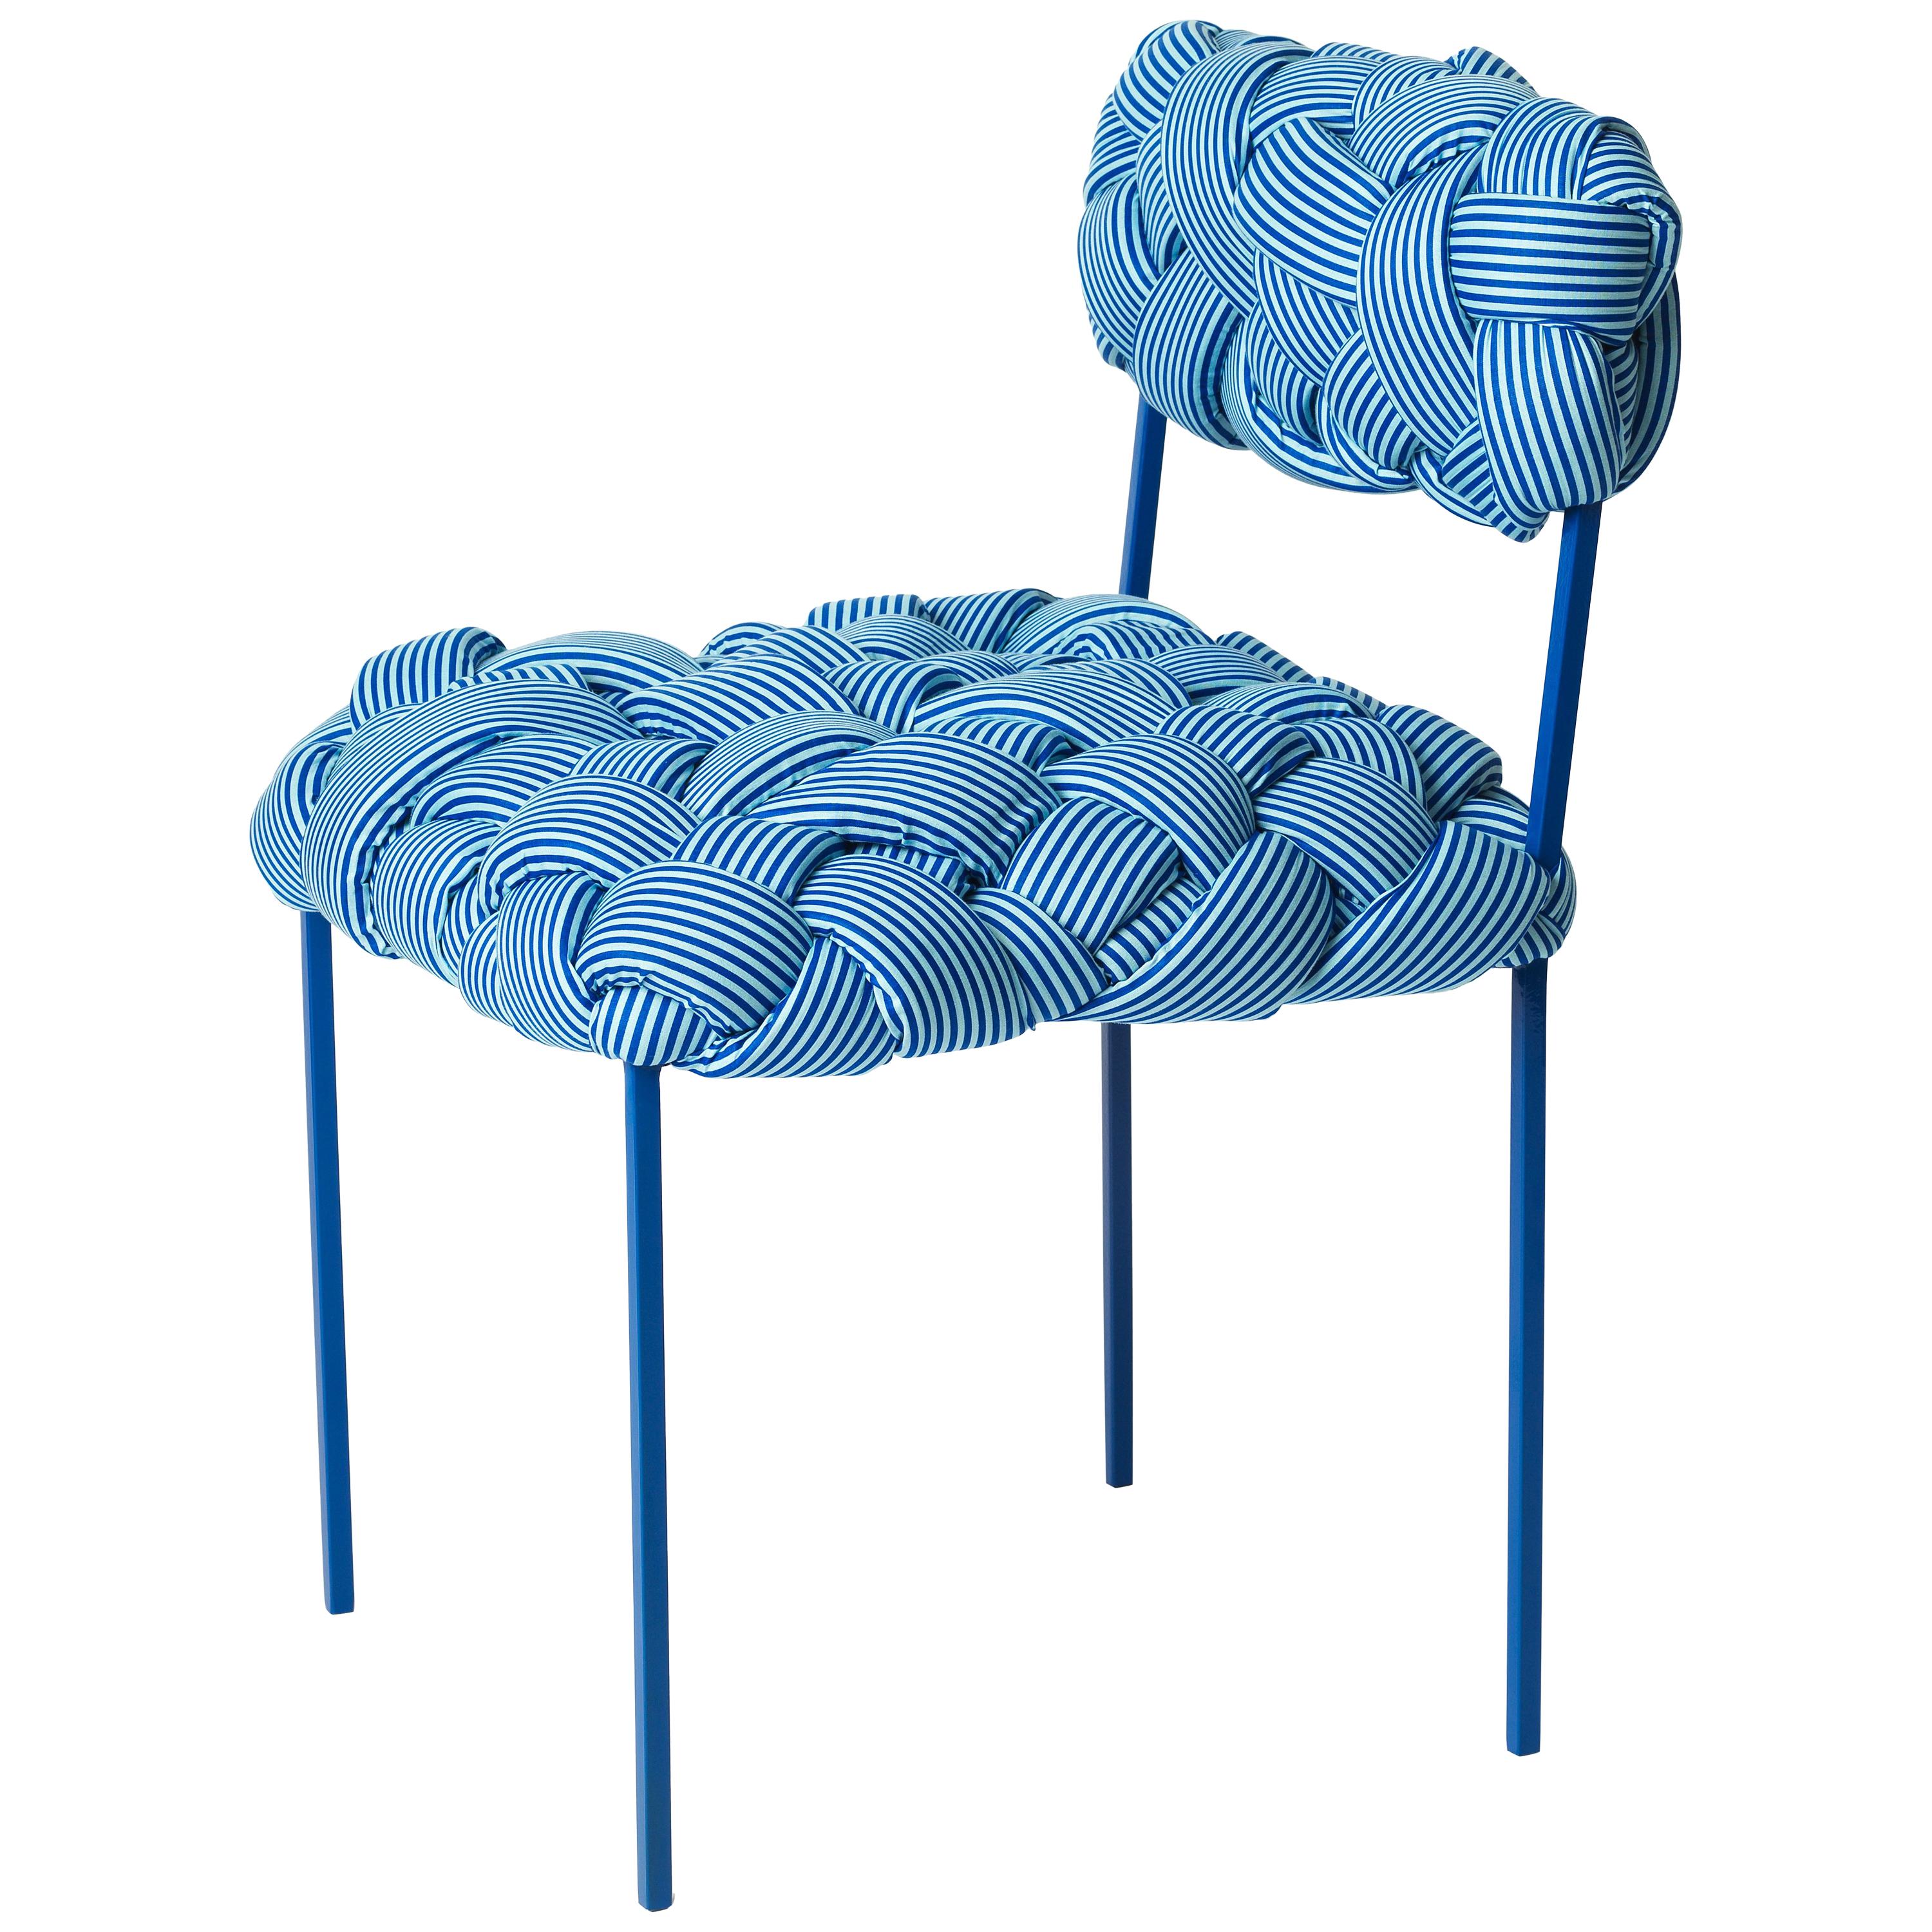 "Cloud" Contemporary Chair with Handwoven Blue Upholstery